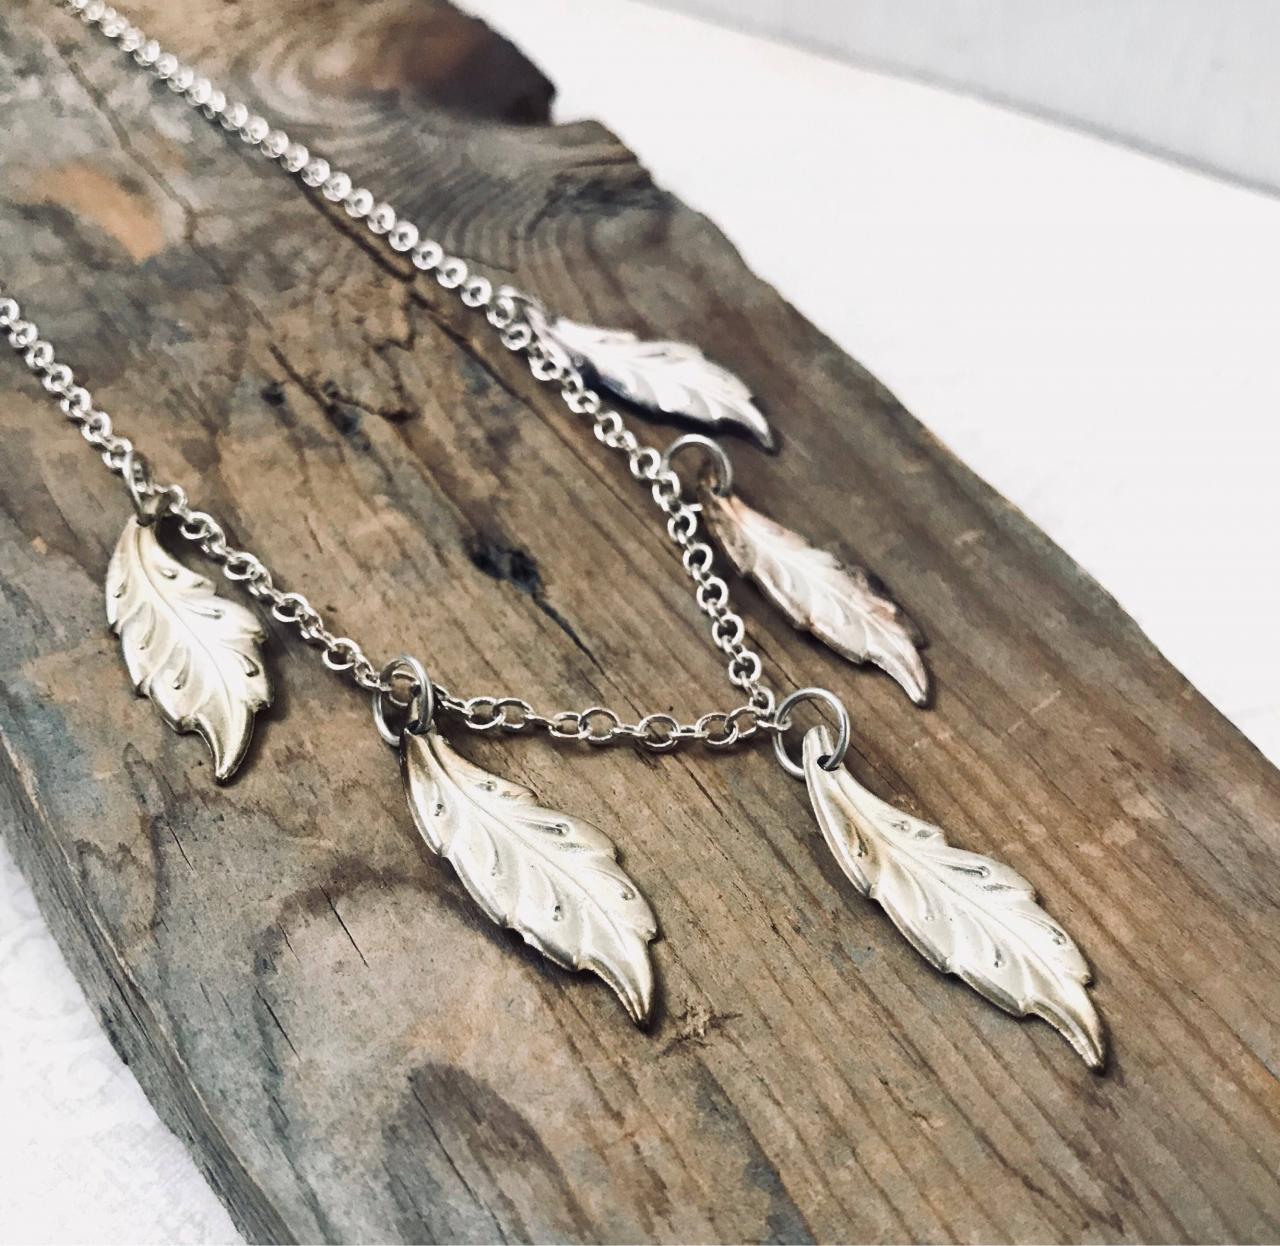 Silver Leaf Necklace - Vintage Style Nature Inspired Woodland Mothers Day Vintage Leaves Gifts Under 30 Statement Jewelry Wholesale